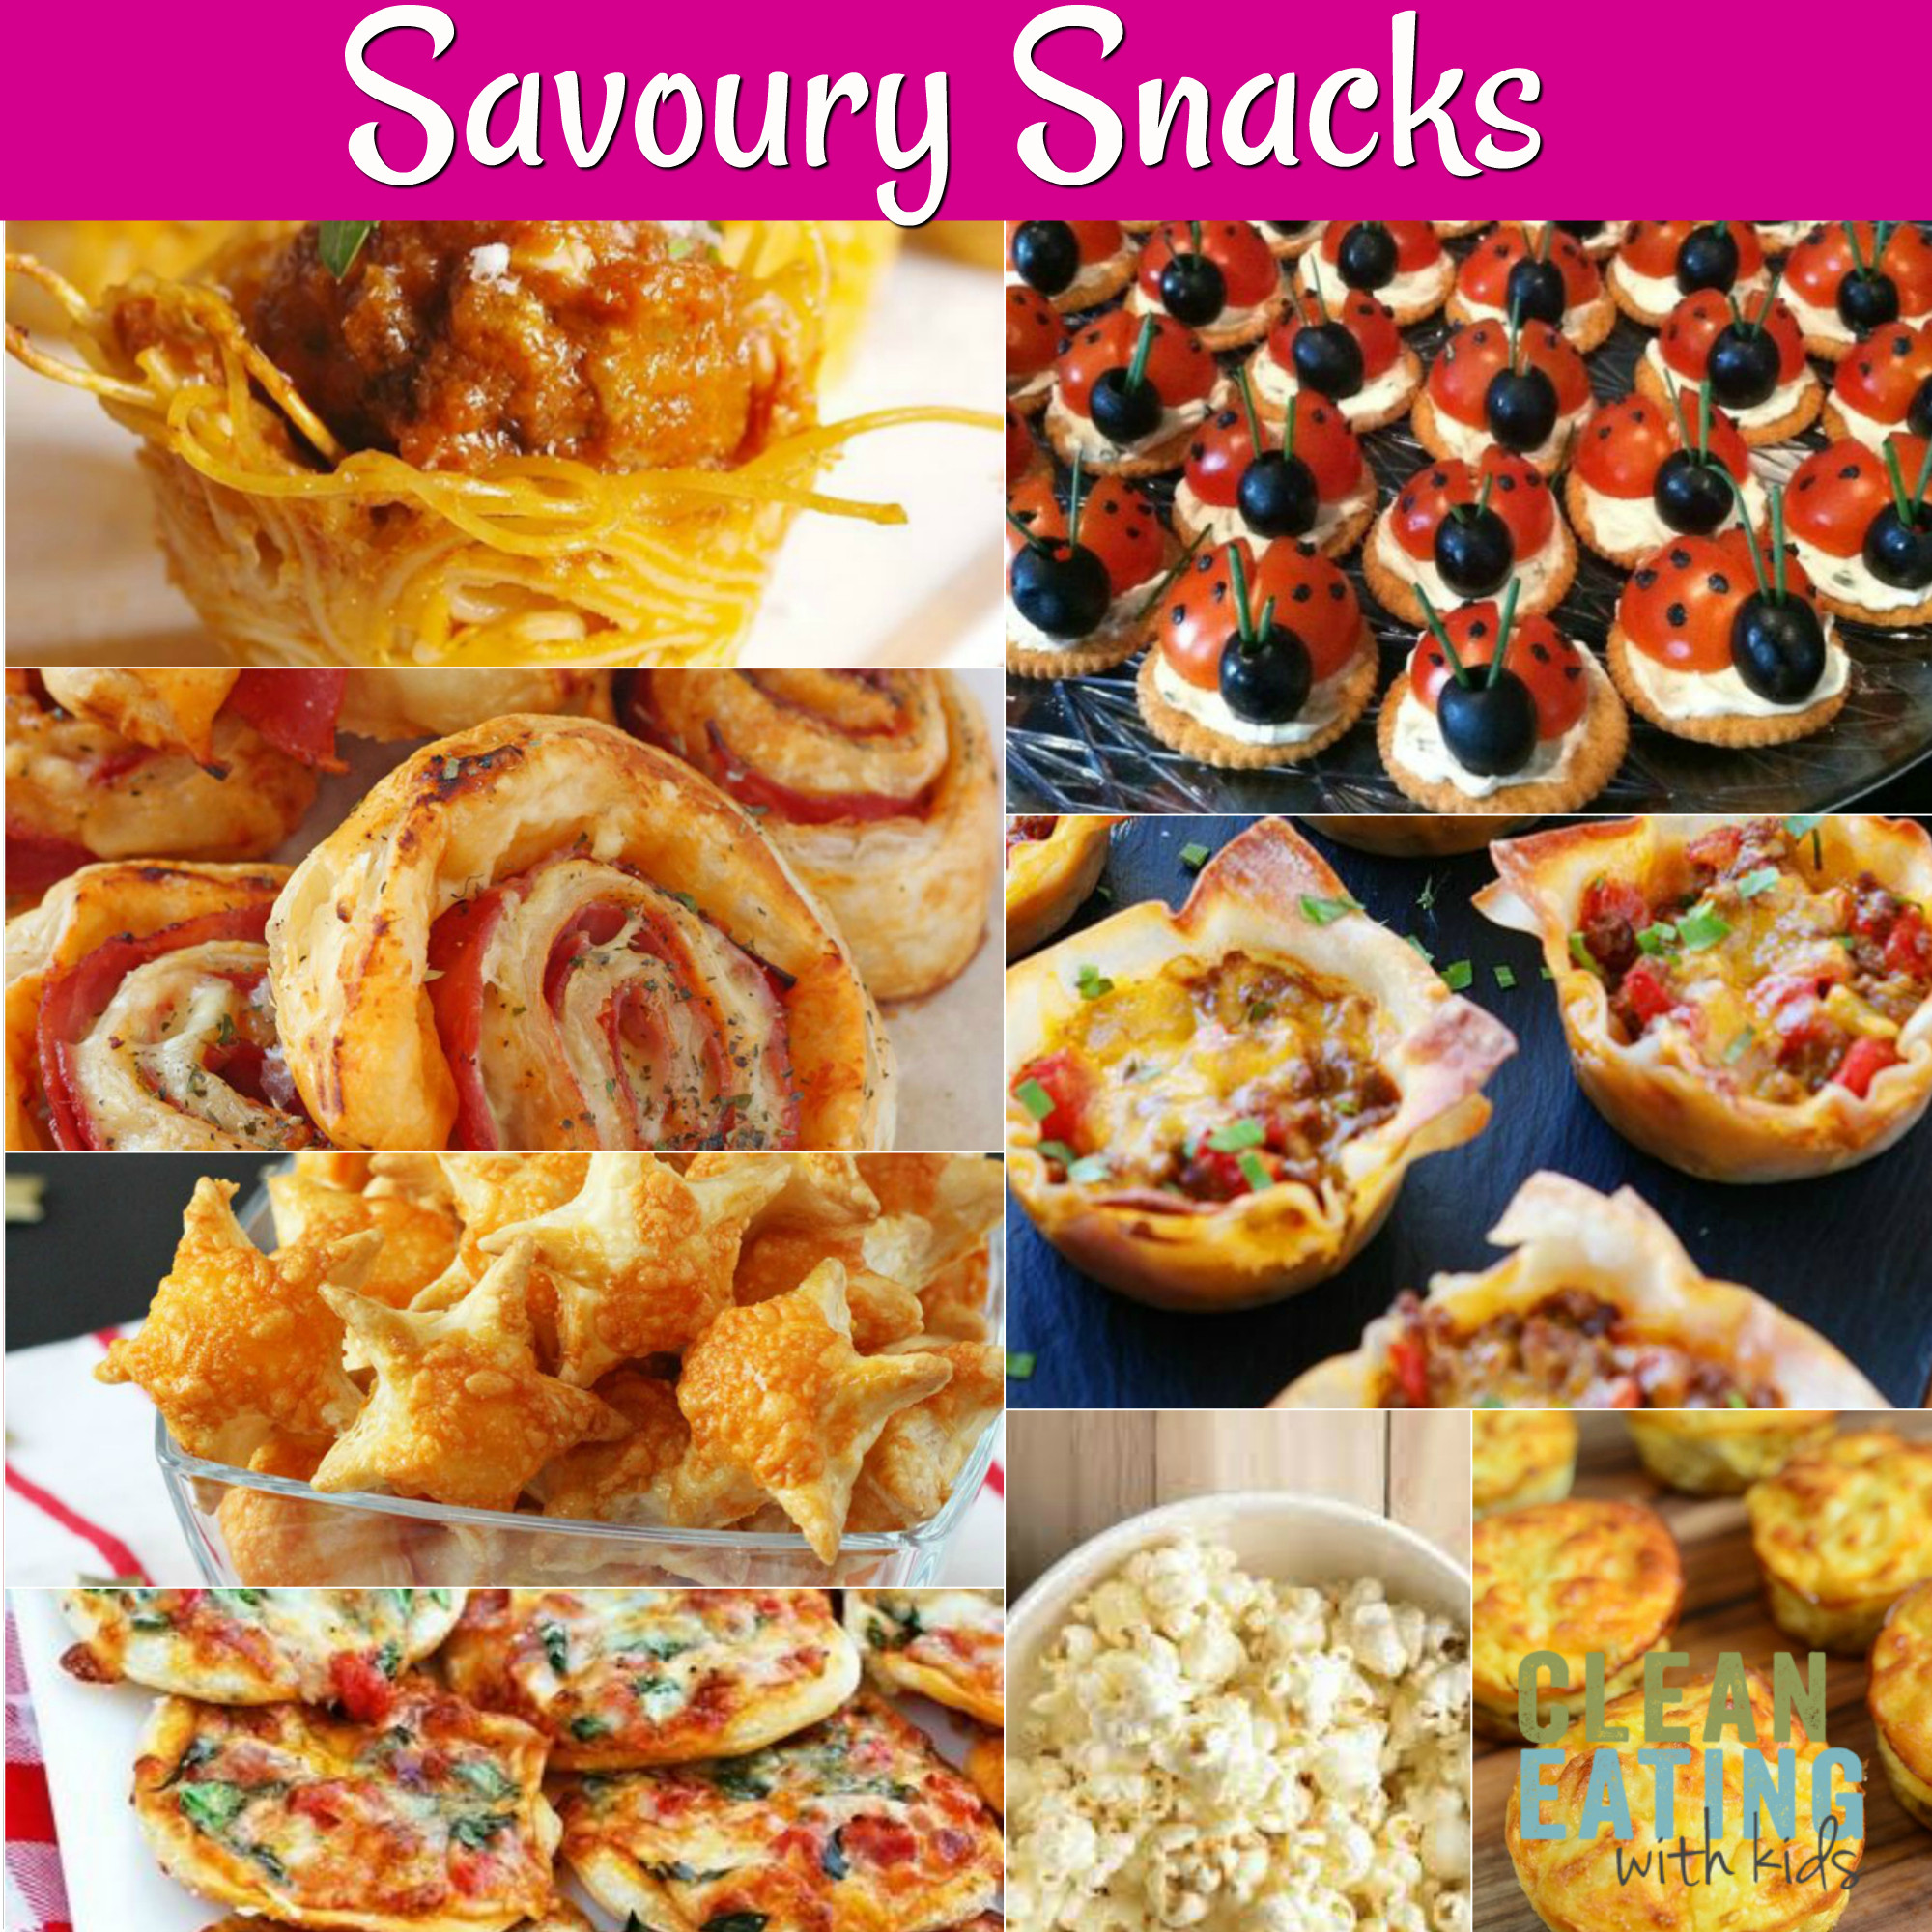 Birthday Party Snack Food Ideas
 25 Healthy Birthday Party Food Ideas Clean Eating with kids